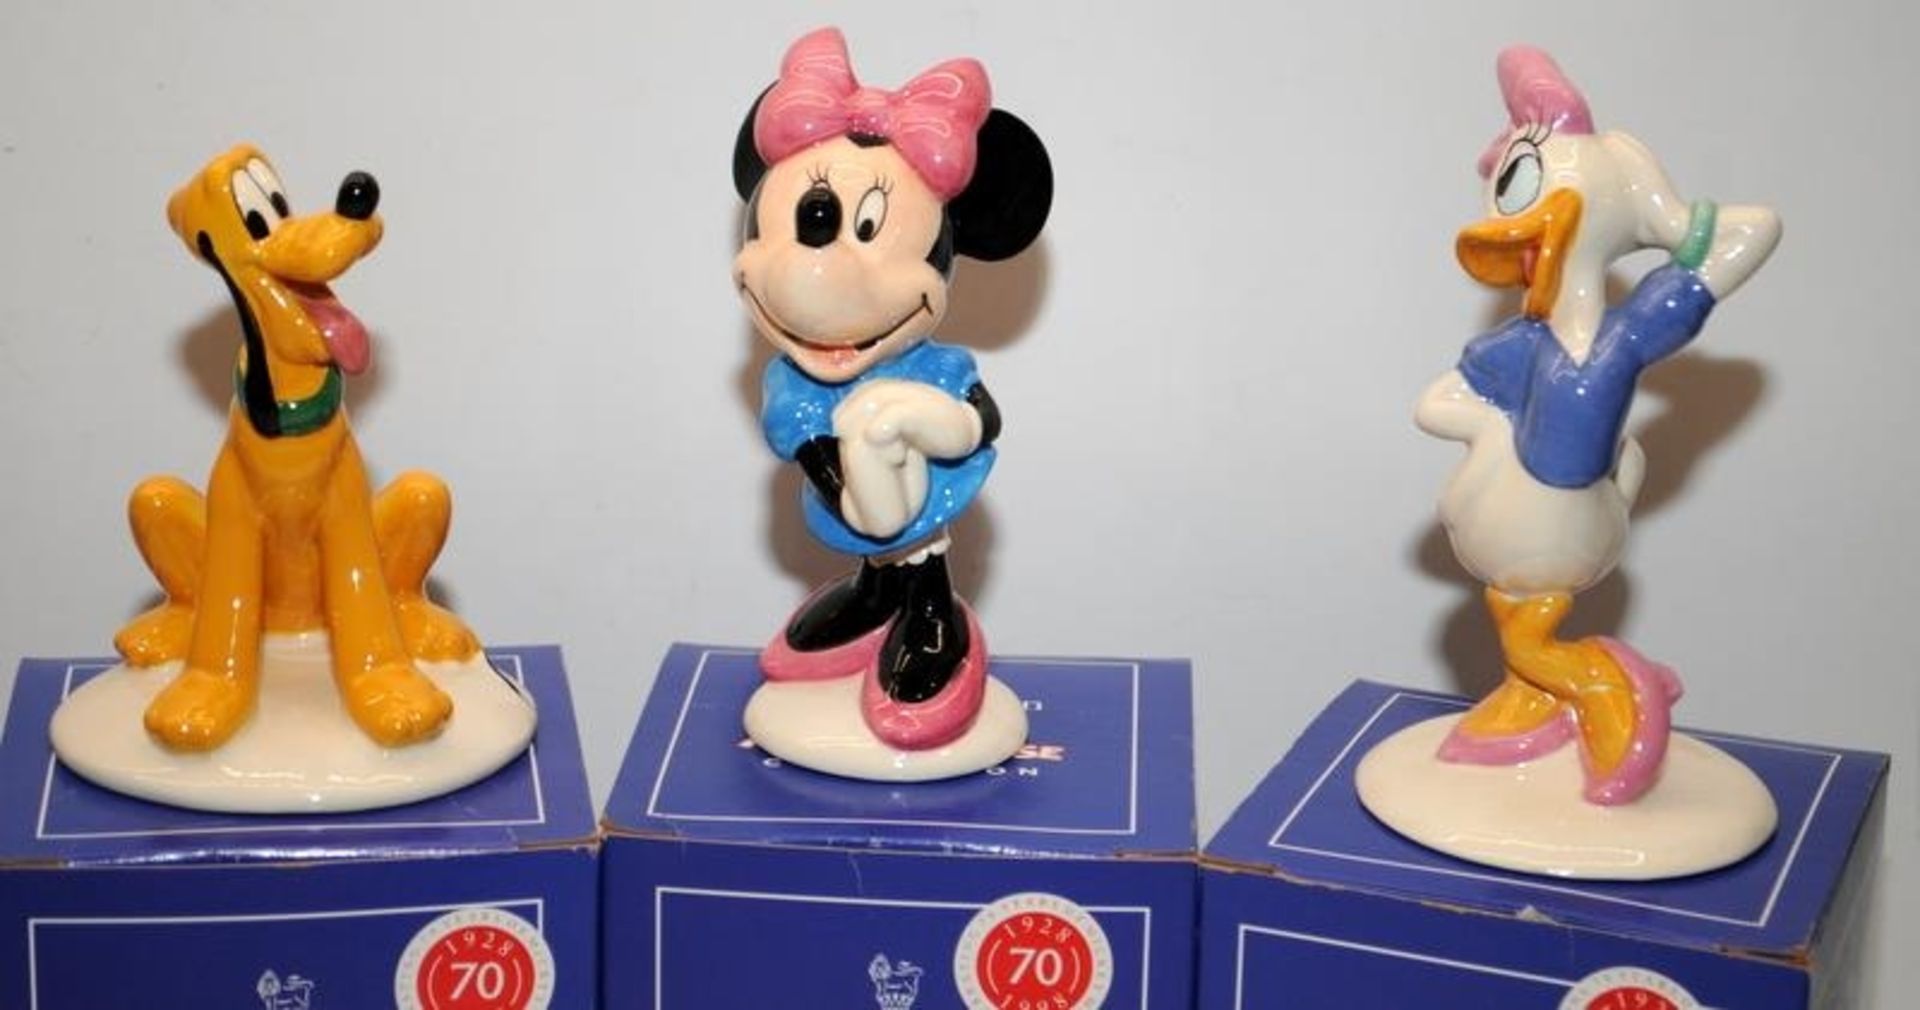 Royal Doulton Mickey Mouse 70th Anniversary Collection. Complete set of all 6 figures, boxed - Image 3 of 3